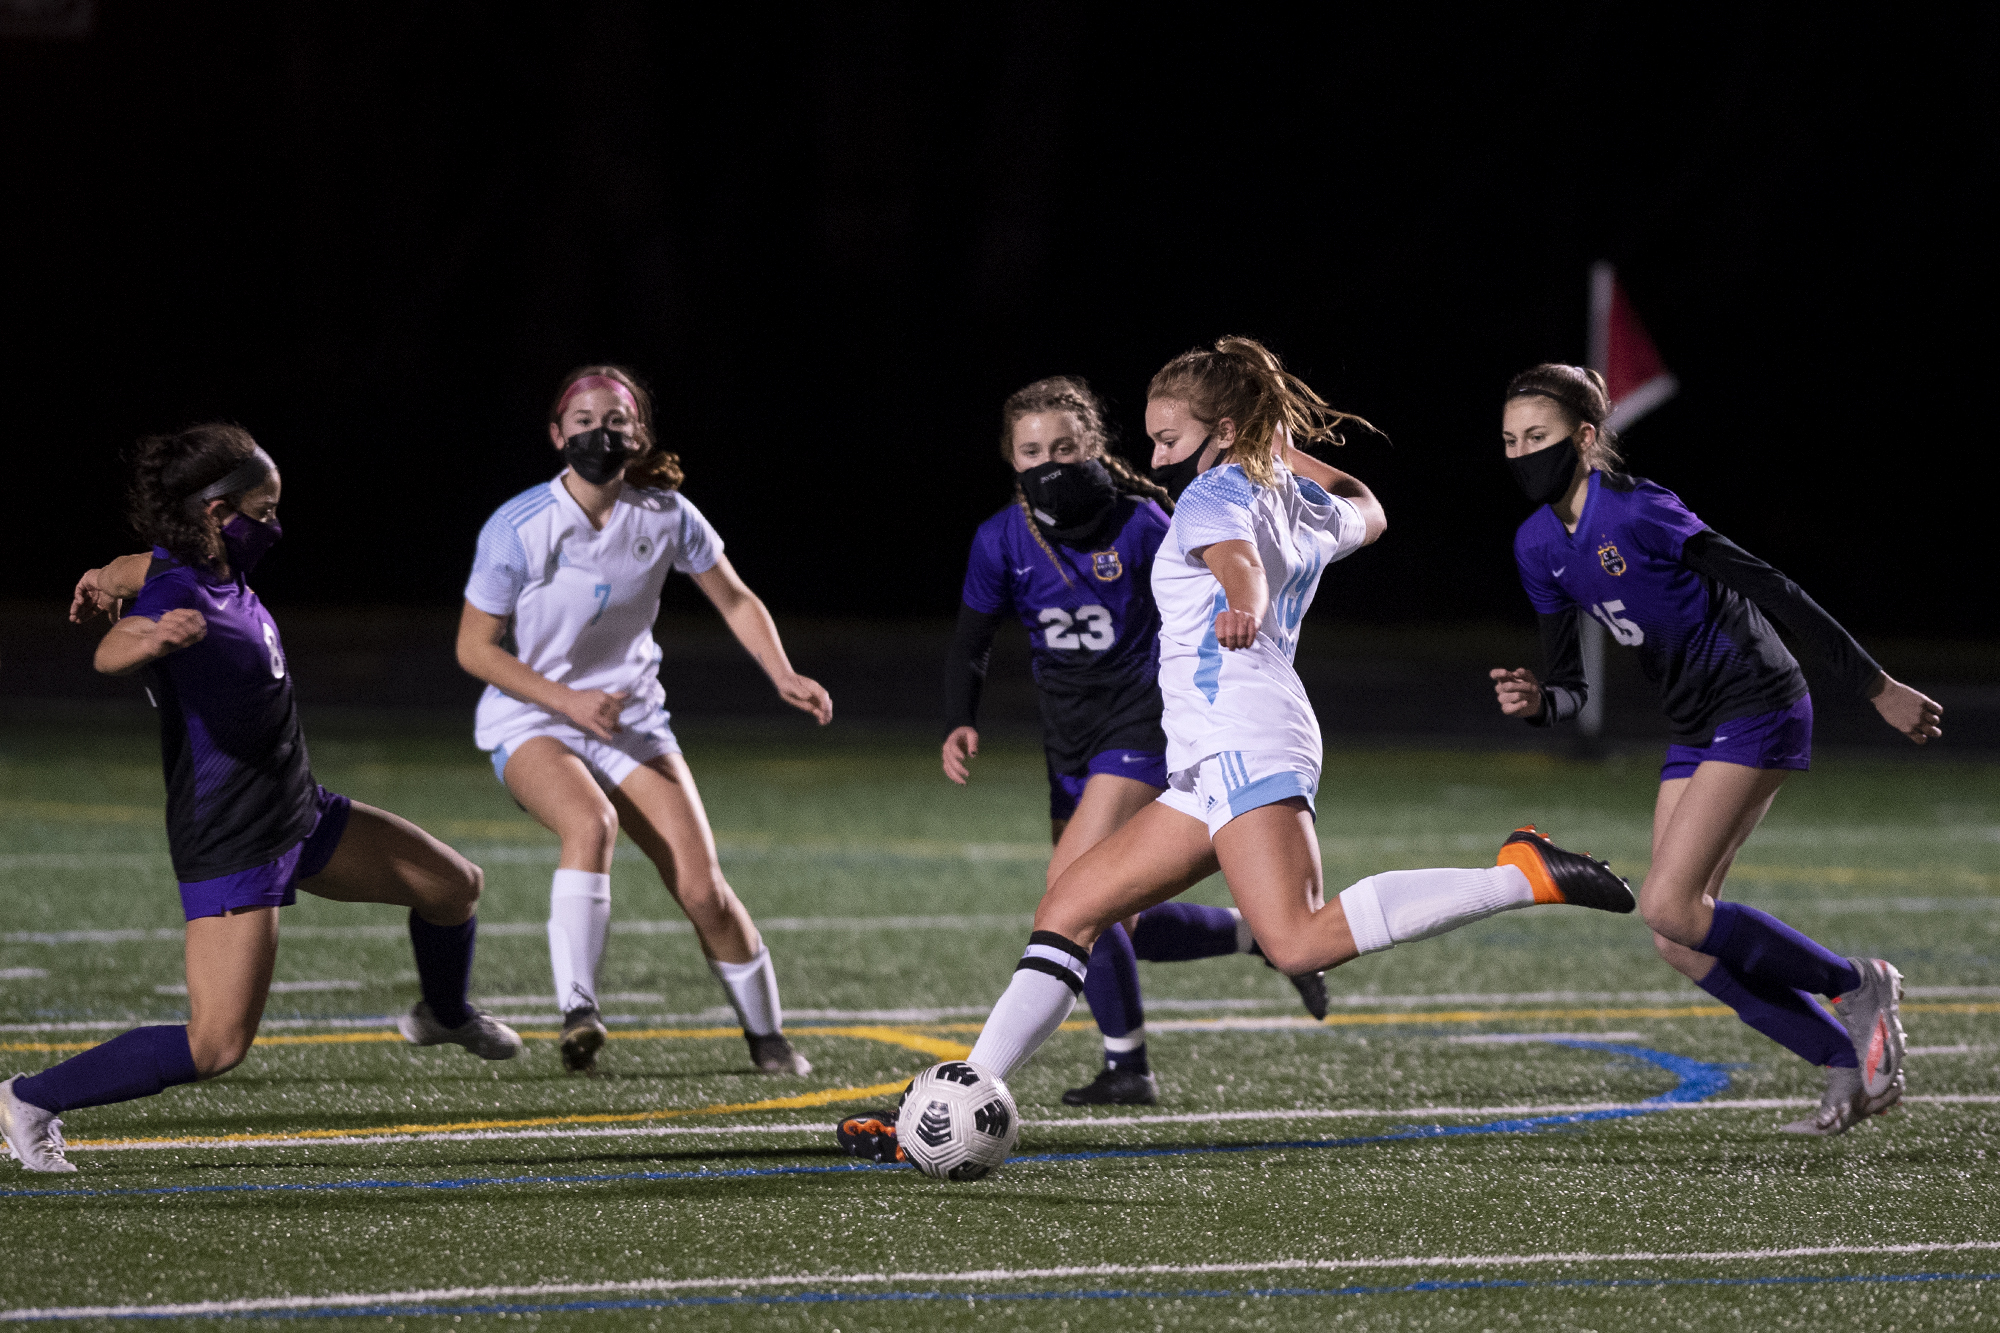 Hockinson’s Payton Lawson fires a shot on Saturday, February 27, 2021, at Columbia River High School. The Hawks earned a 1-0 victory over Columbia River in a rematch of the 2019 2A State girls soccer championship.